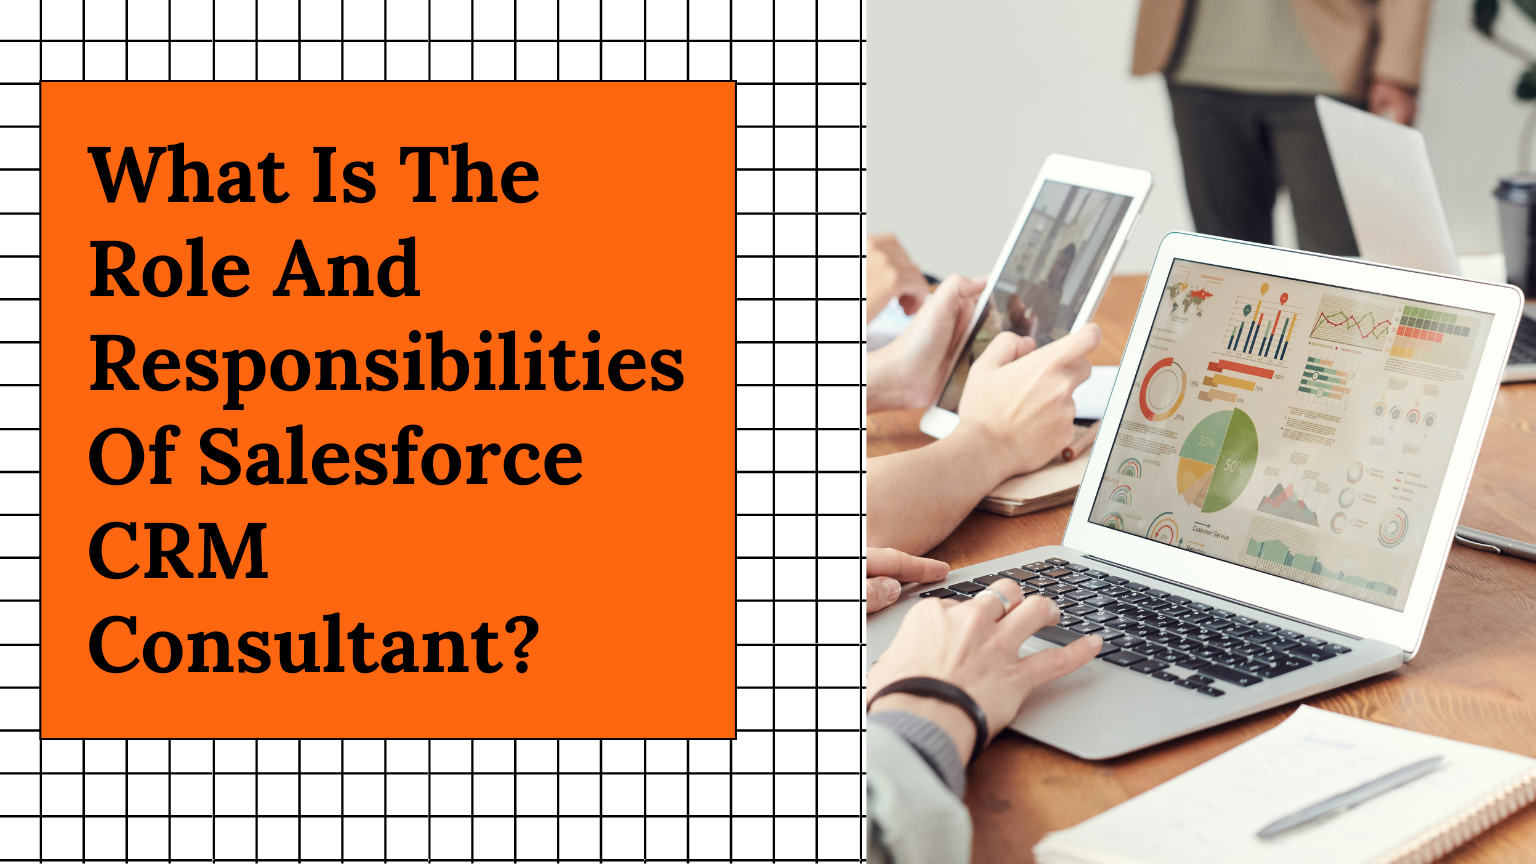 What-Is-The-Role-And-Responsibilities-Of-Salesforce-CRM-Consultant